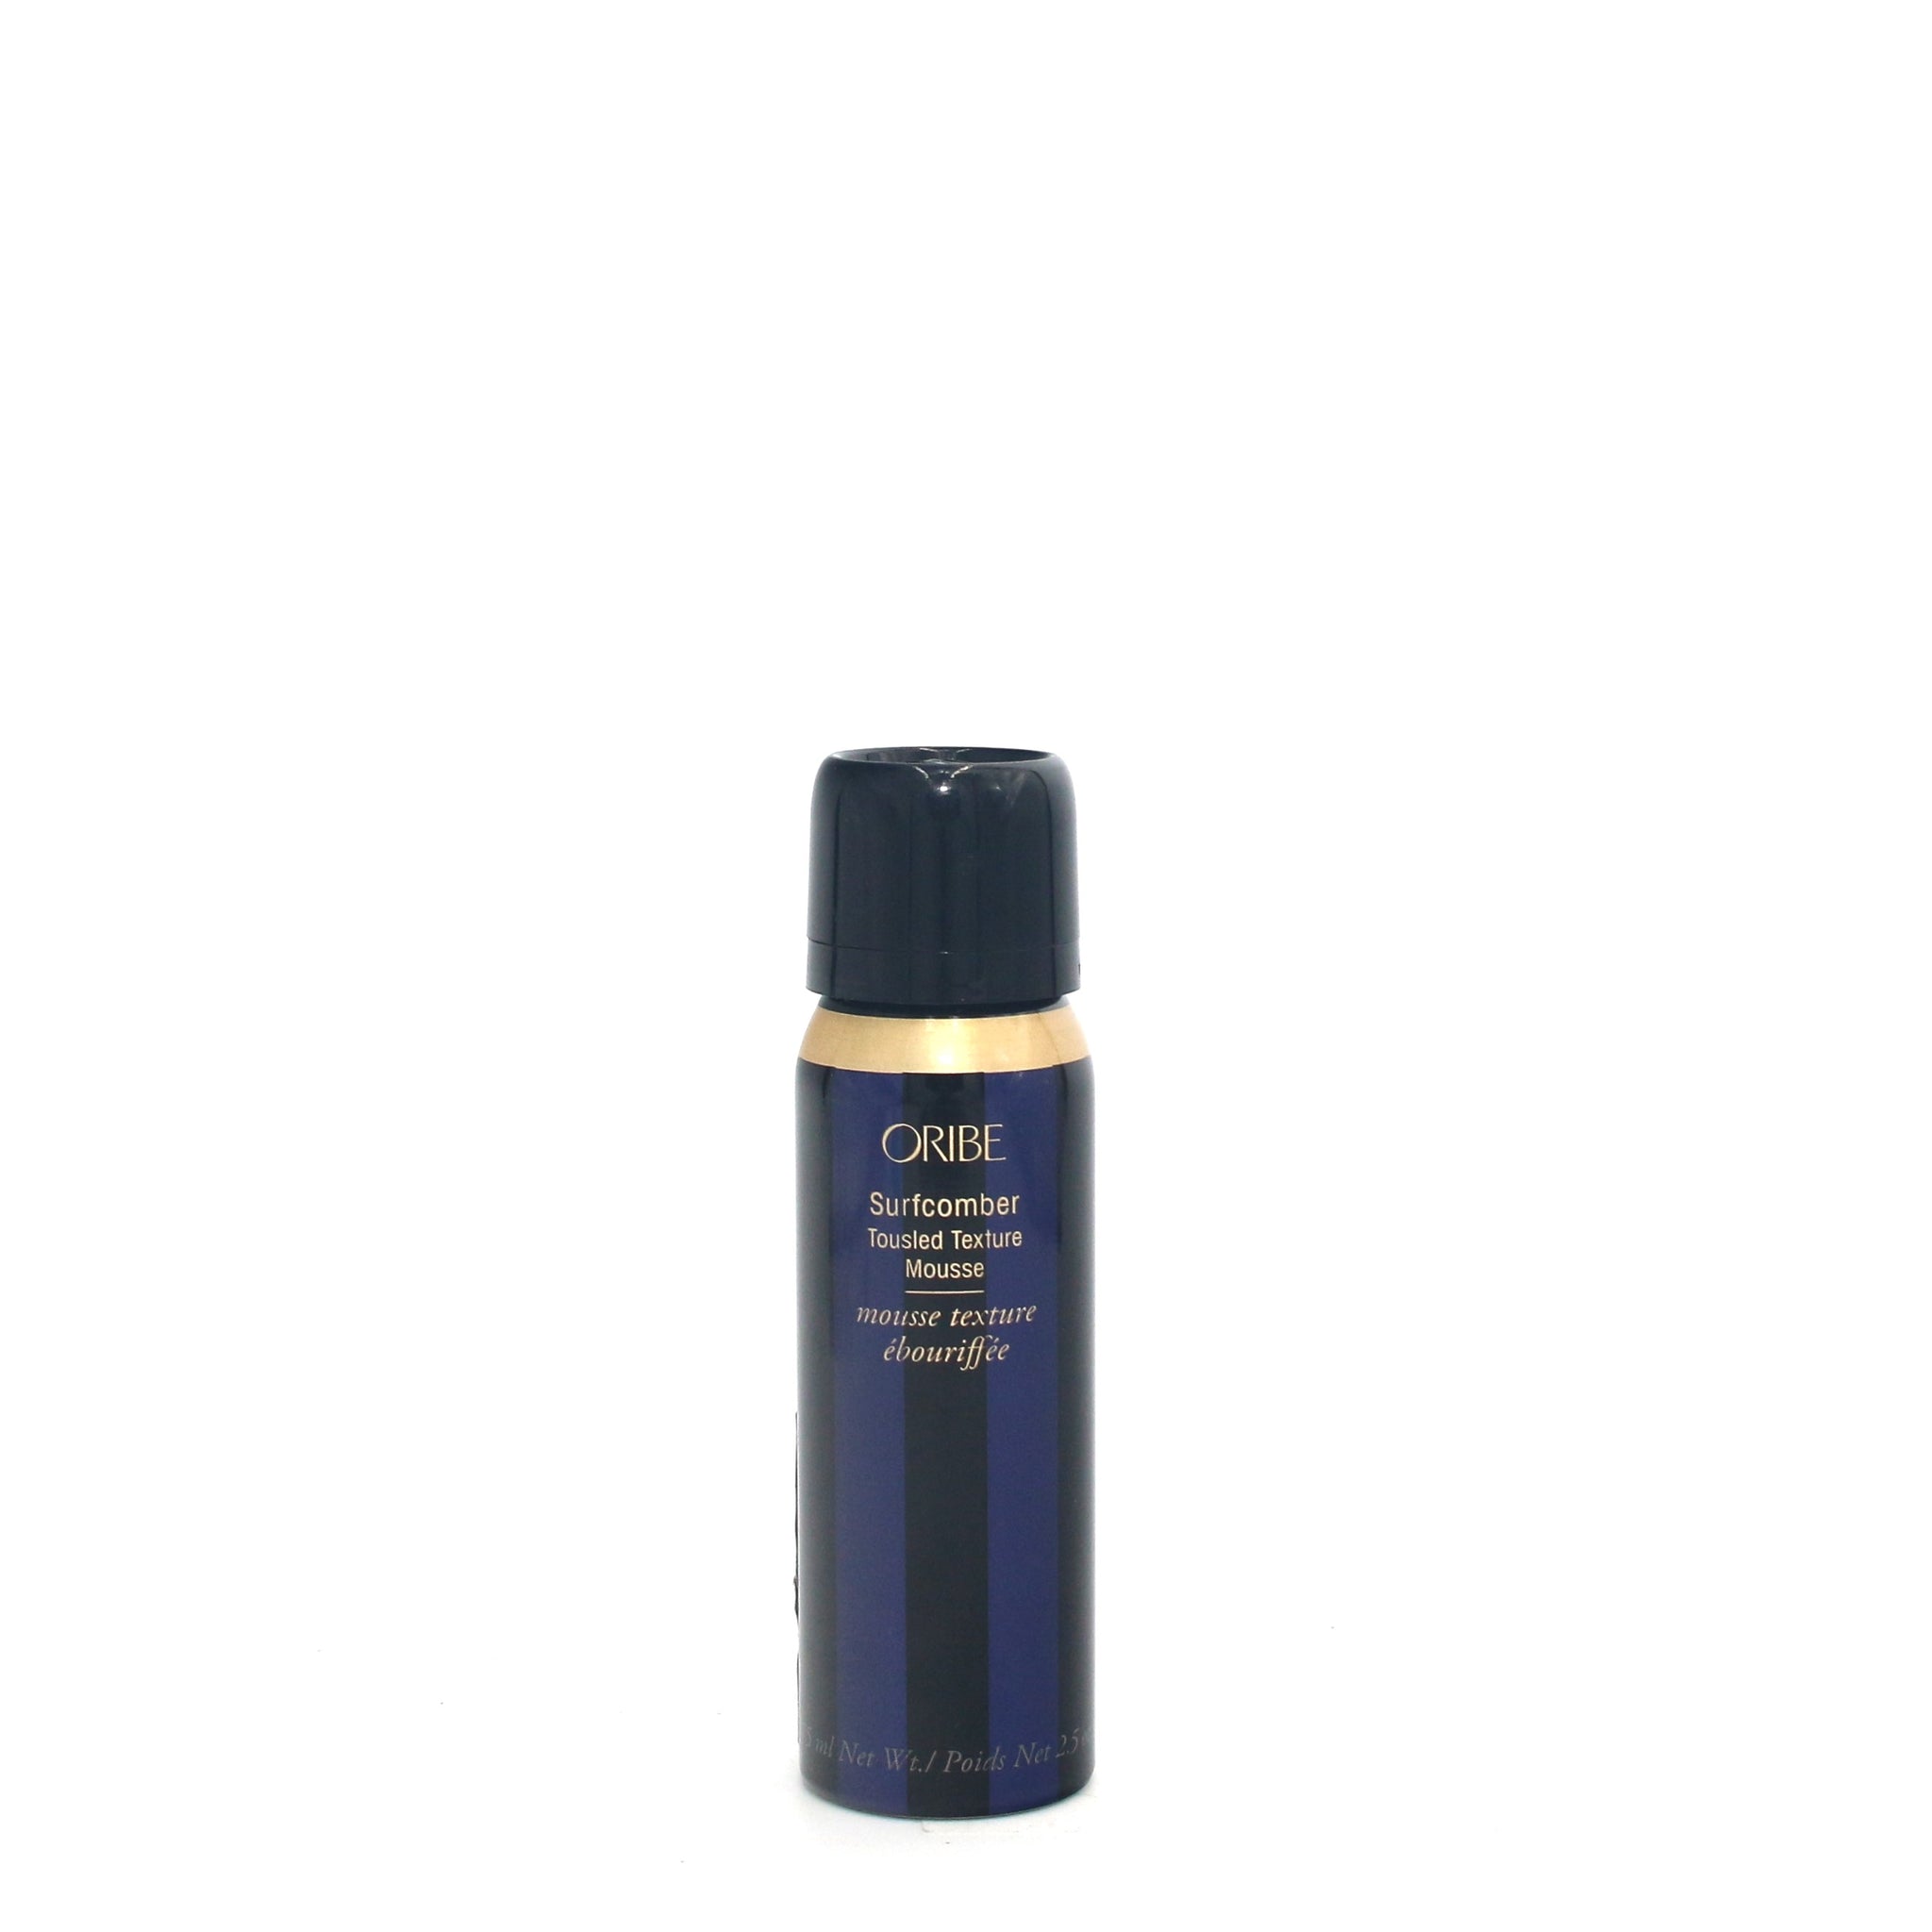 ORIBE Surfcomber Tousled Texture Mousse 2.5 oz